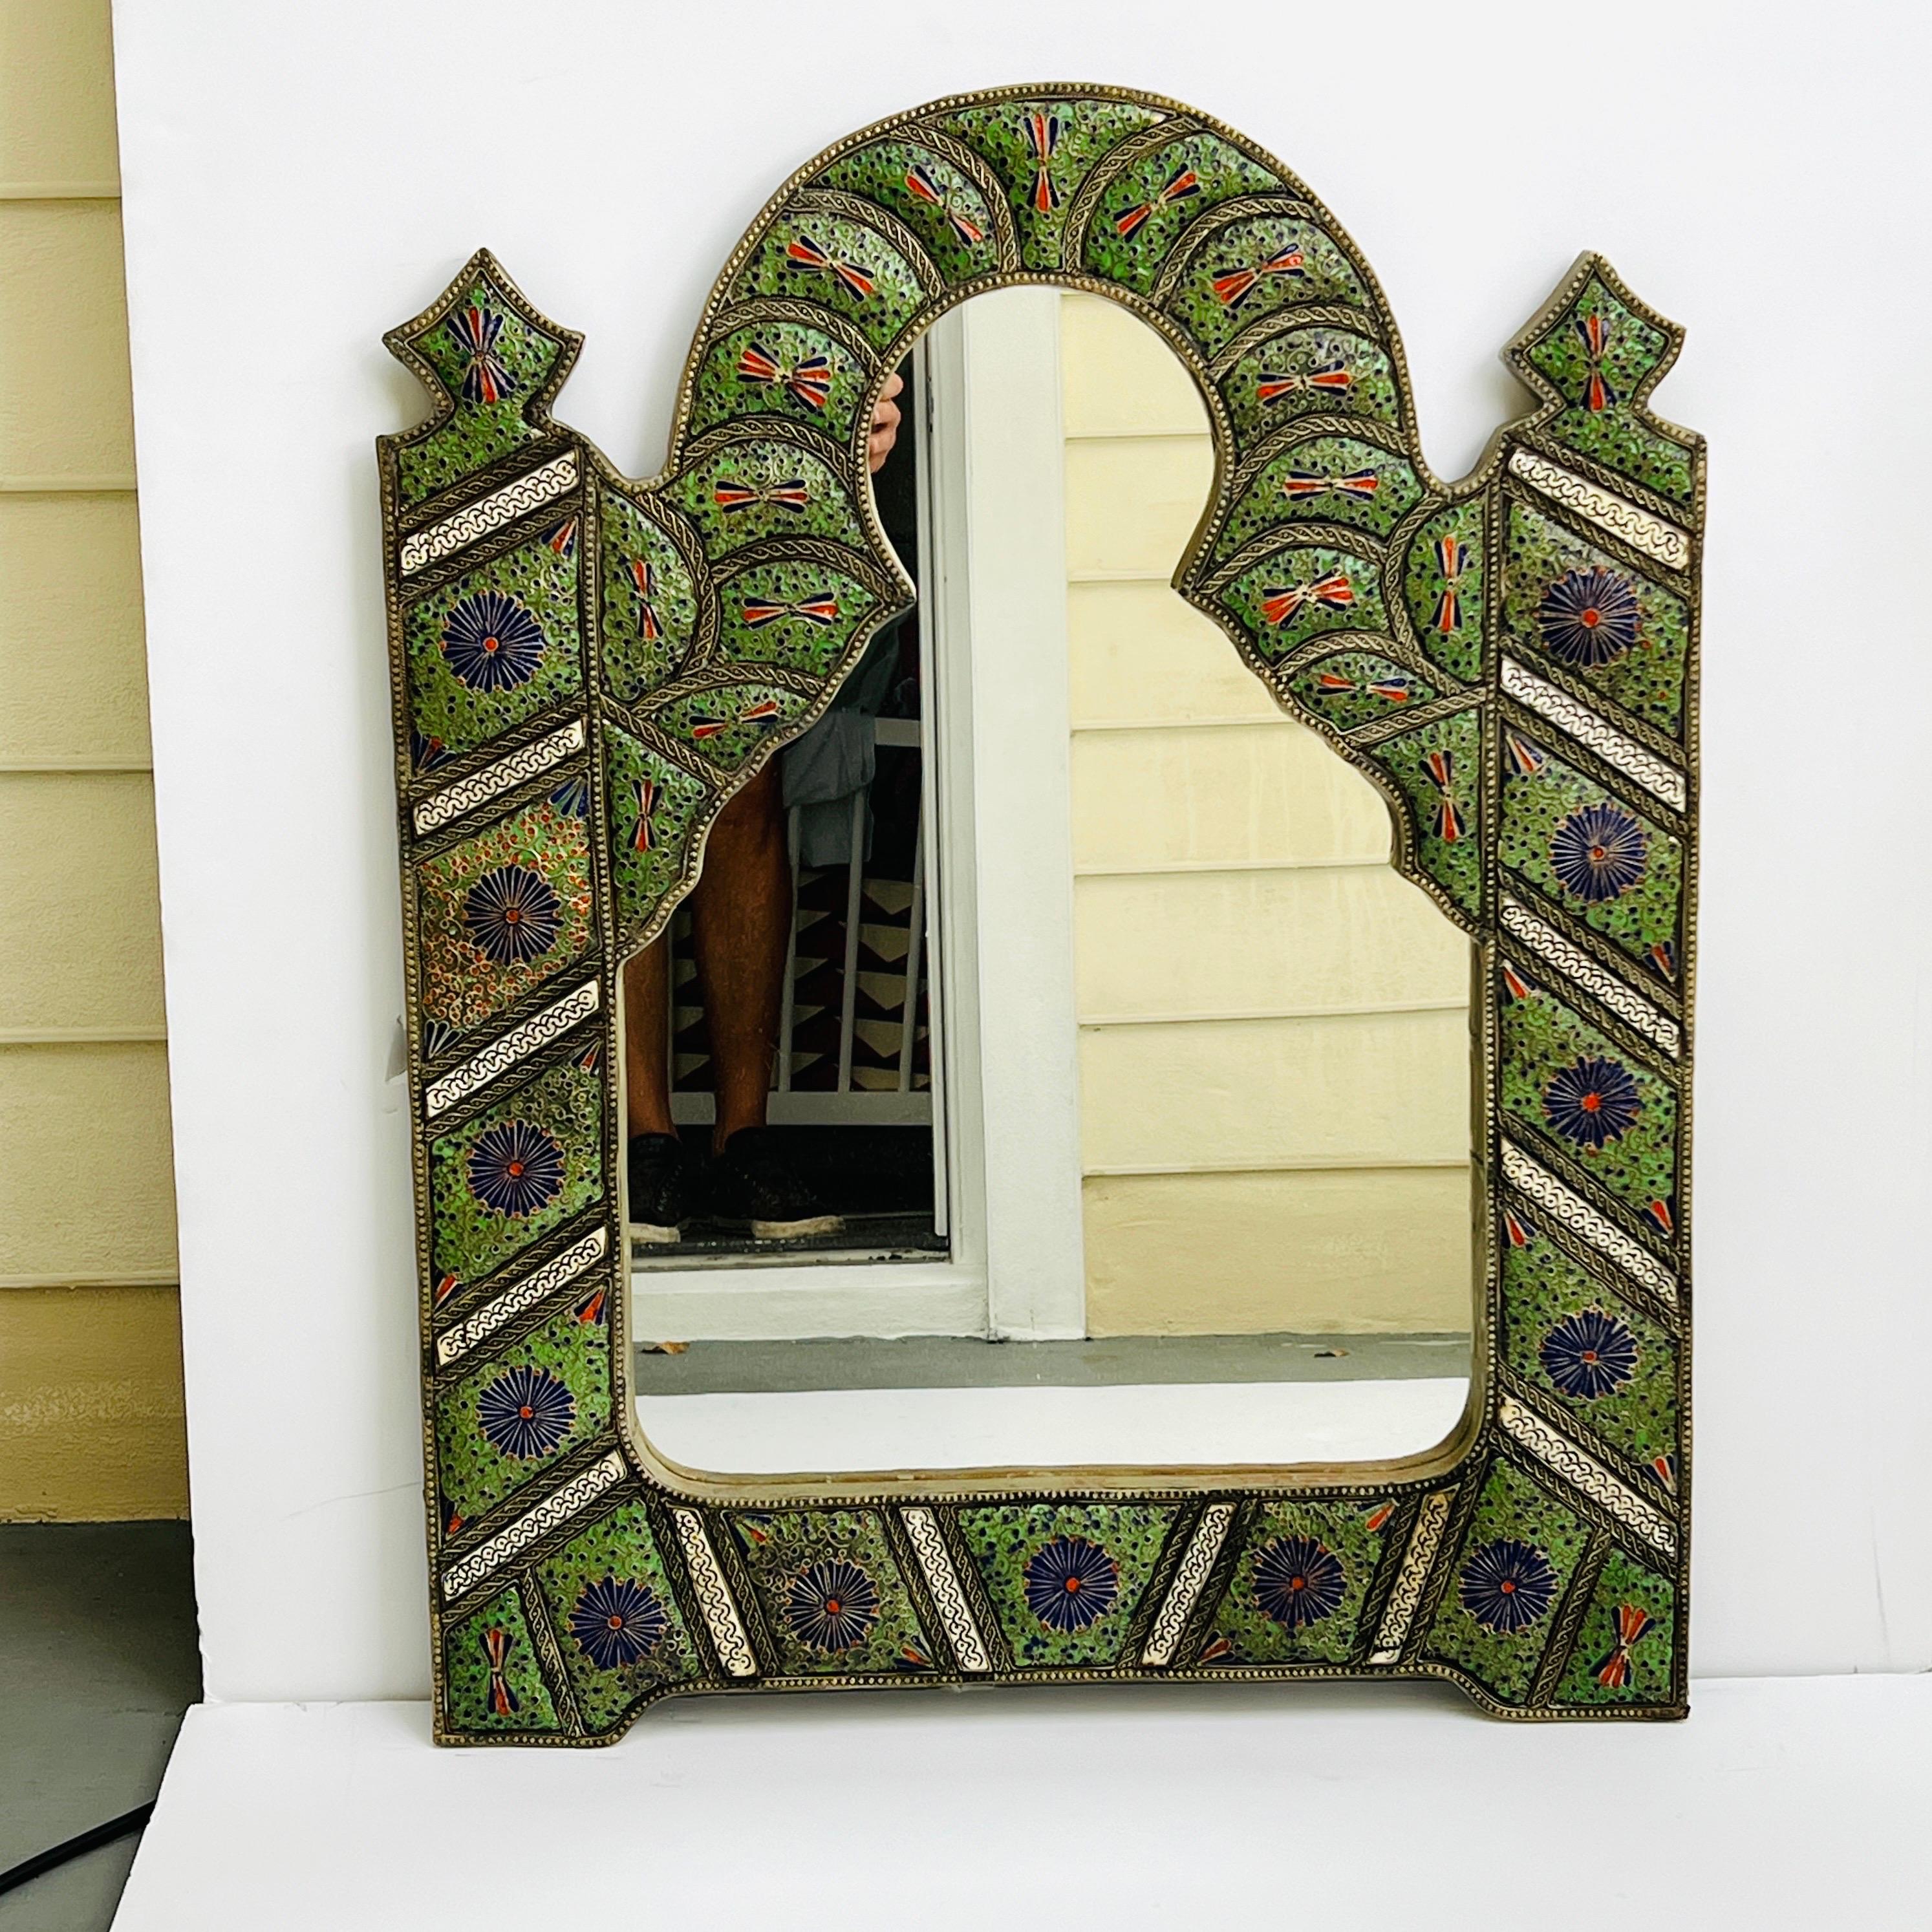 Moorish Arch Mirror in Enameled Cloisonné with Bone Inlays, Morocco c. 1950's For Sale 4